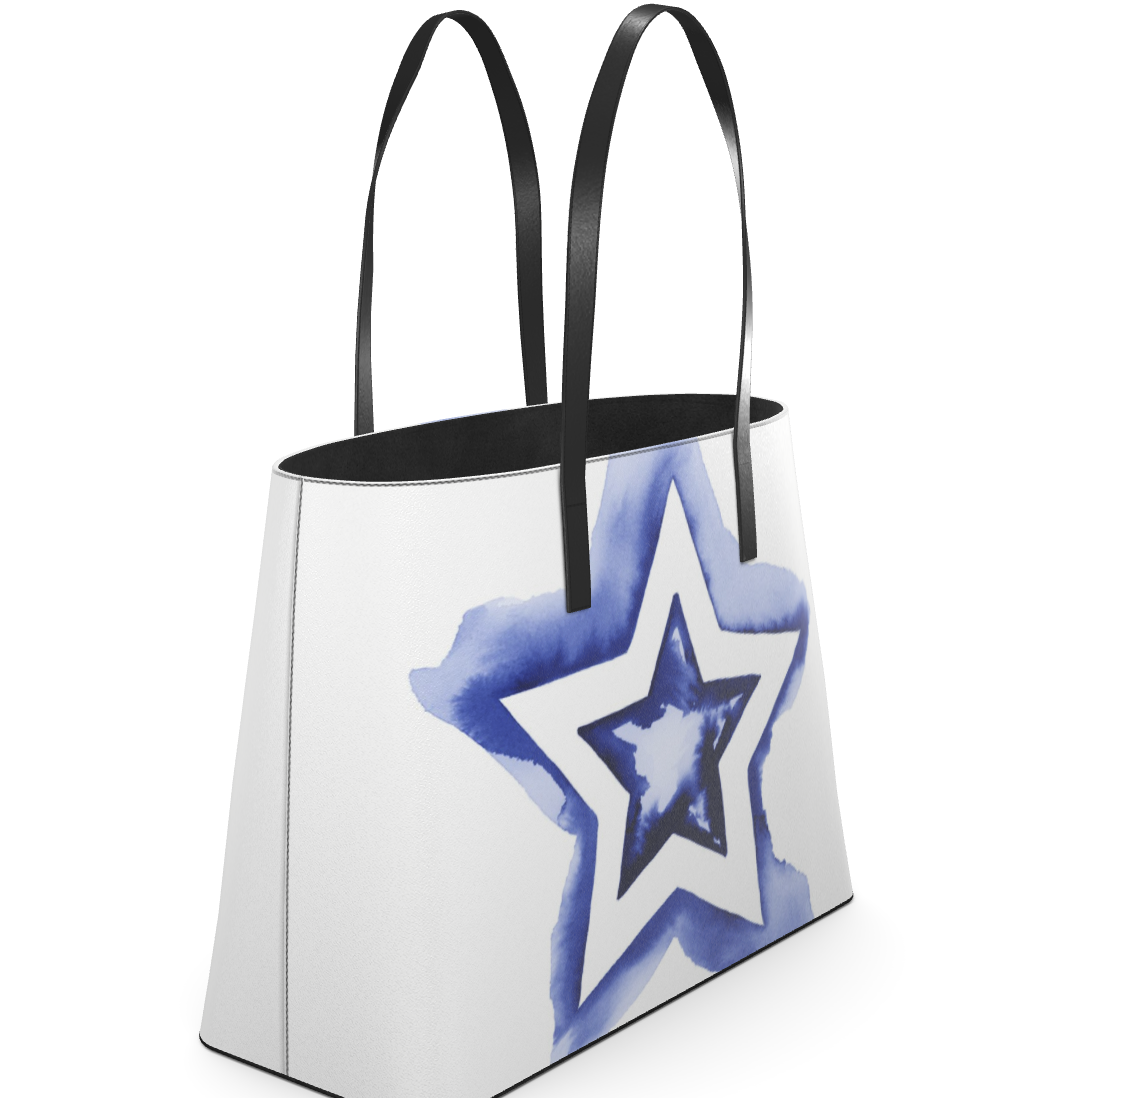 UNTITLED BOUTIQUE White and Blue Leather Kika Star Tote Bag - Limited Edition